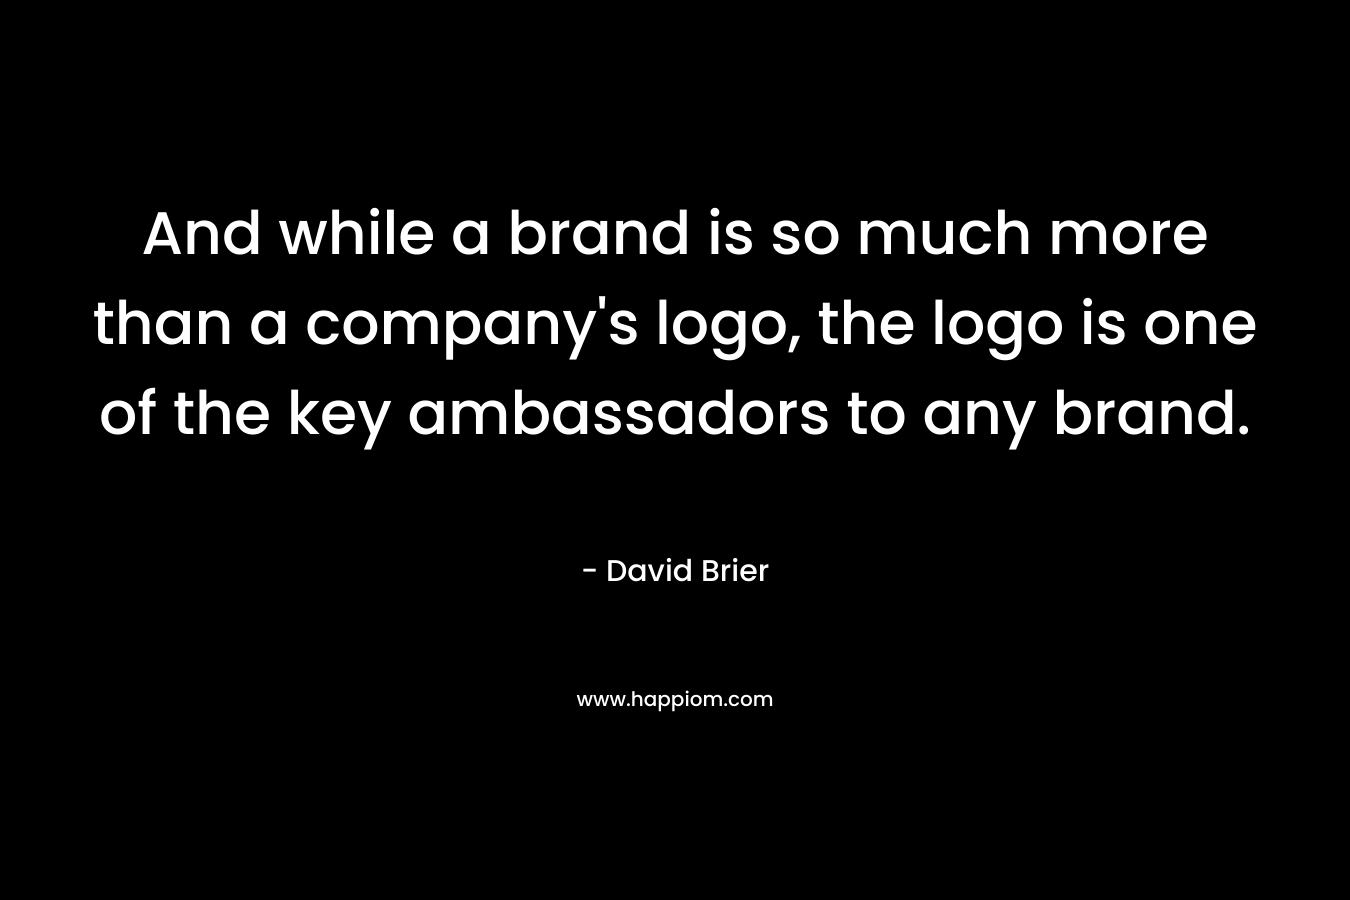 And while a brand is so much more than a company’s logo, the logo is one of the key ambassadors to any brand. – David Brier